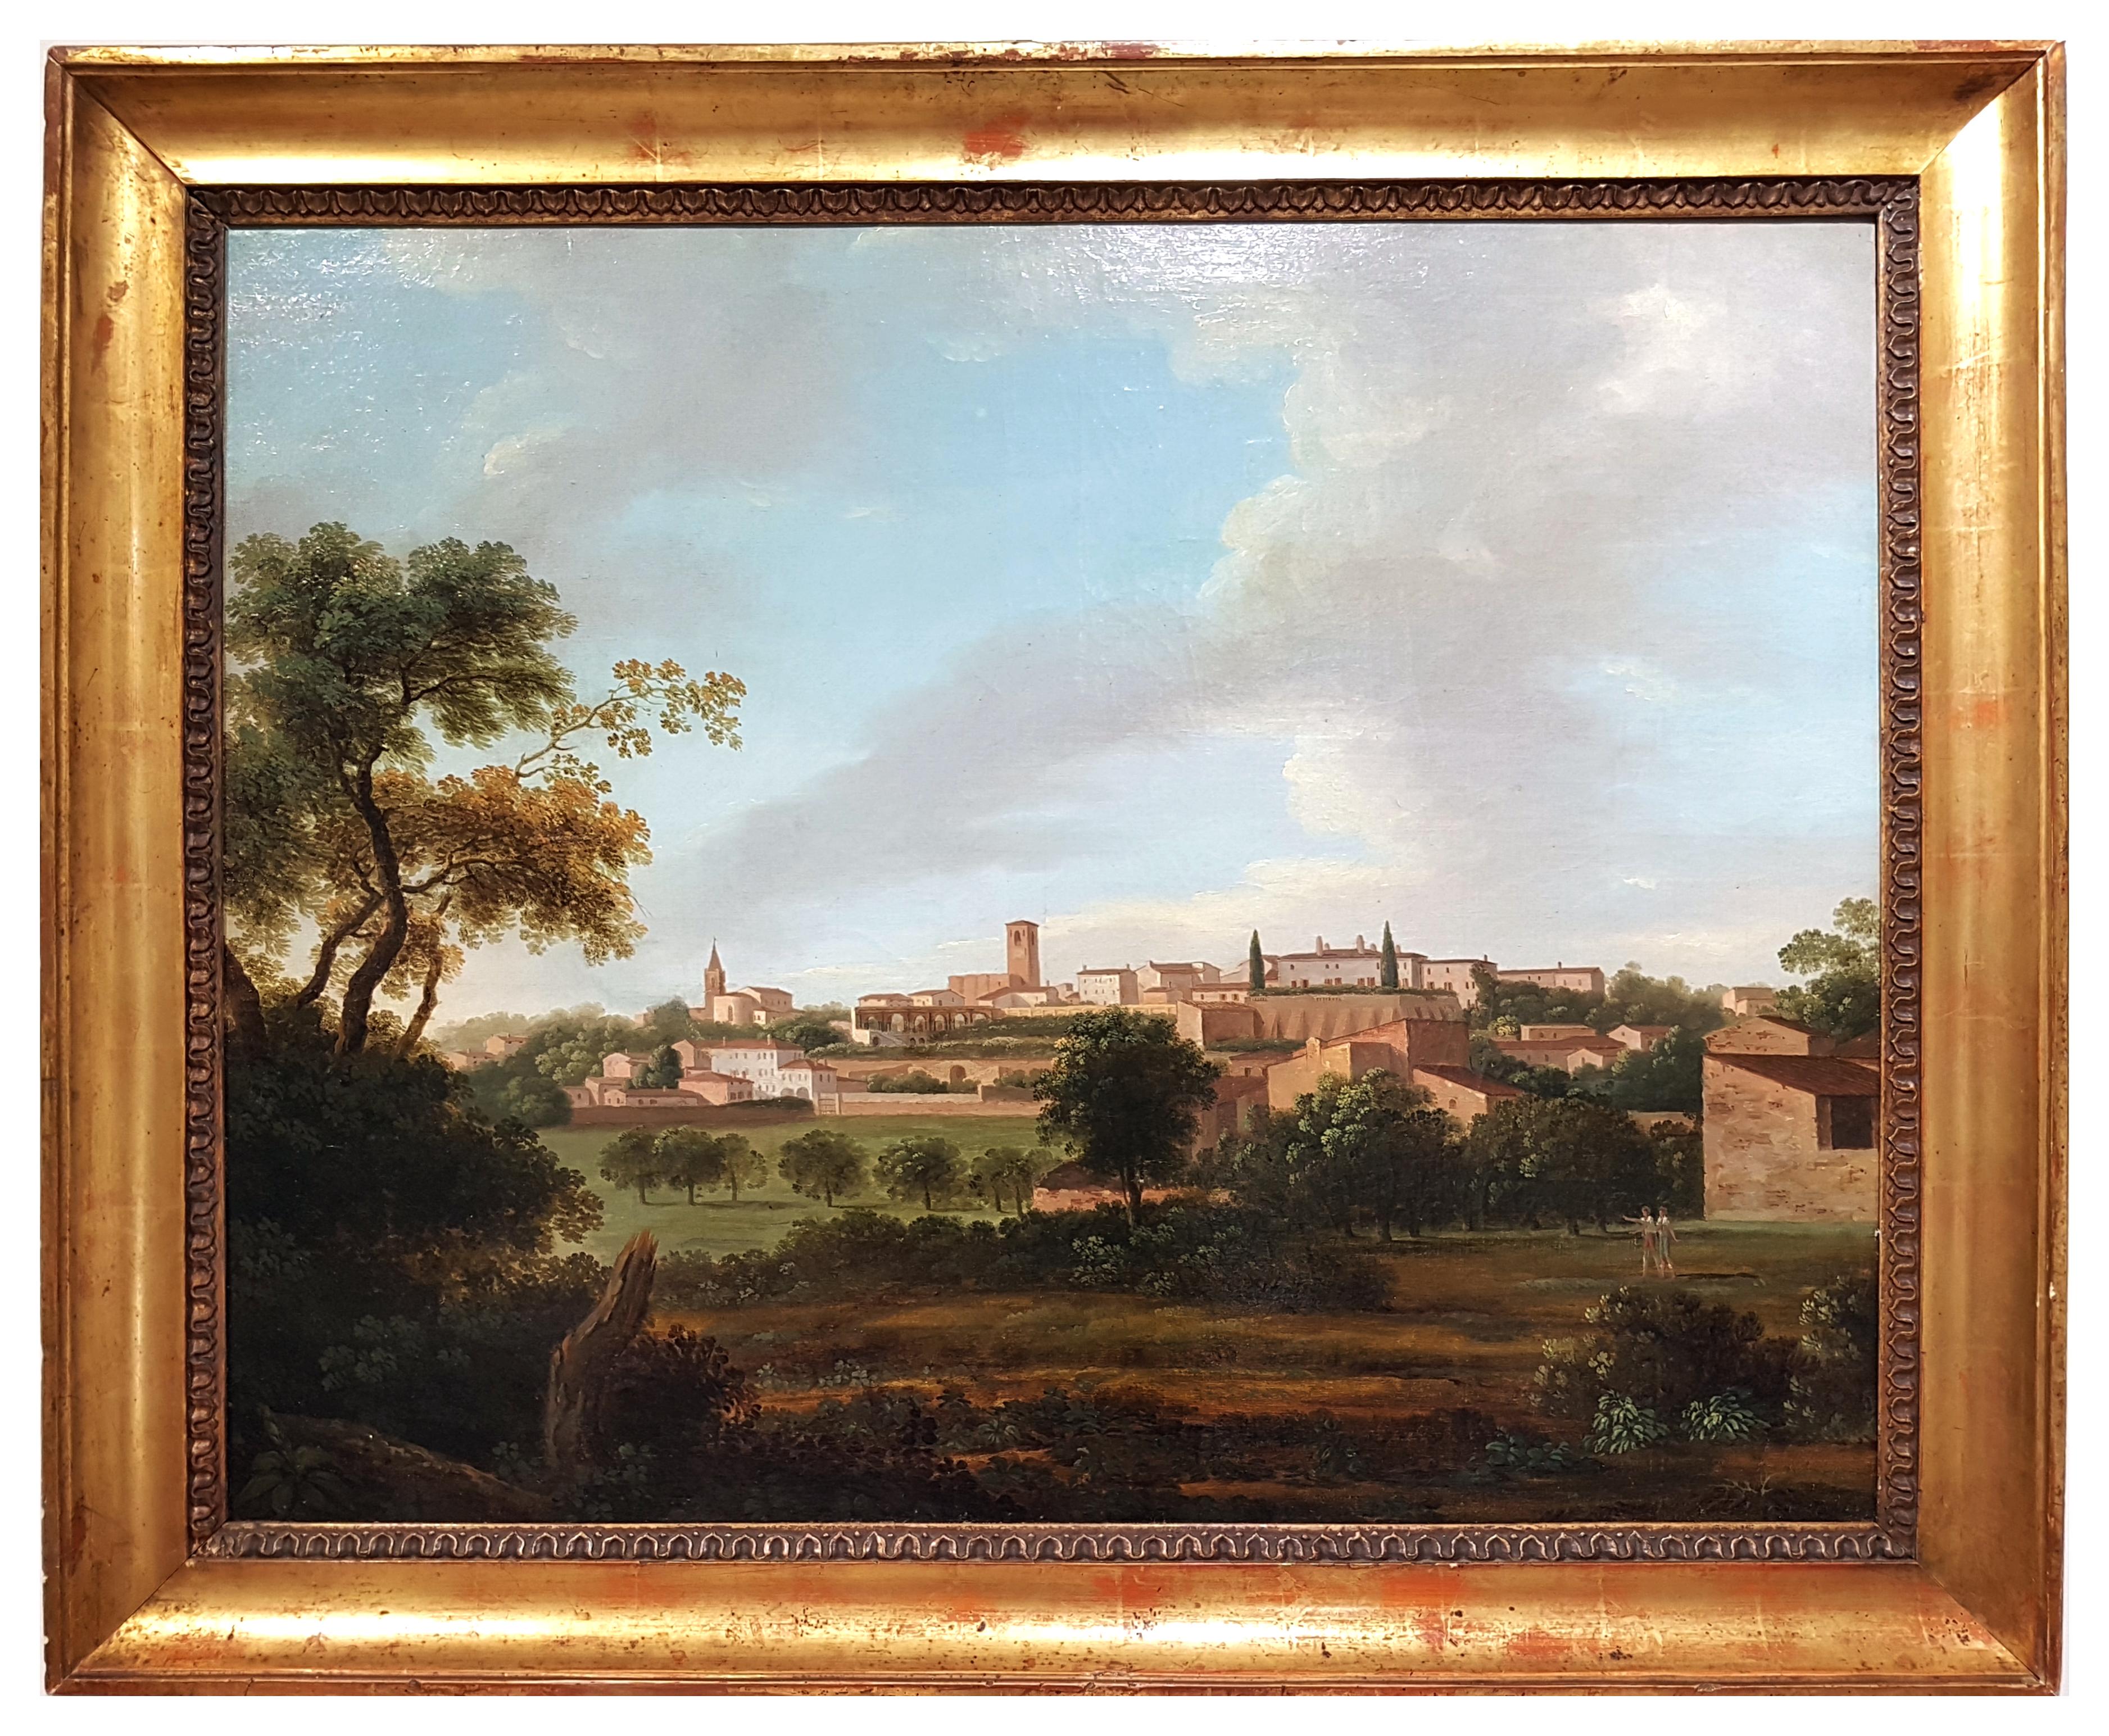 Unknown Landscape Painting - Pair of Landscapes from the Tuscan Countryside - Oil Paintings - 19th century